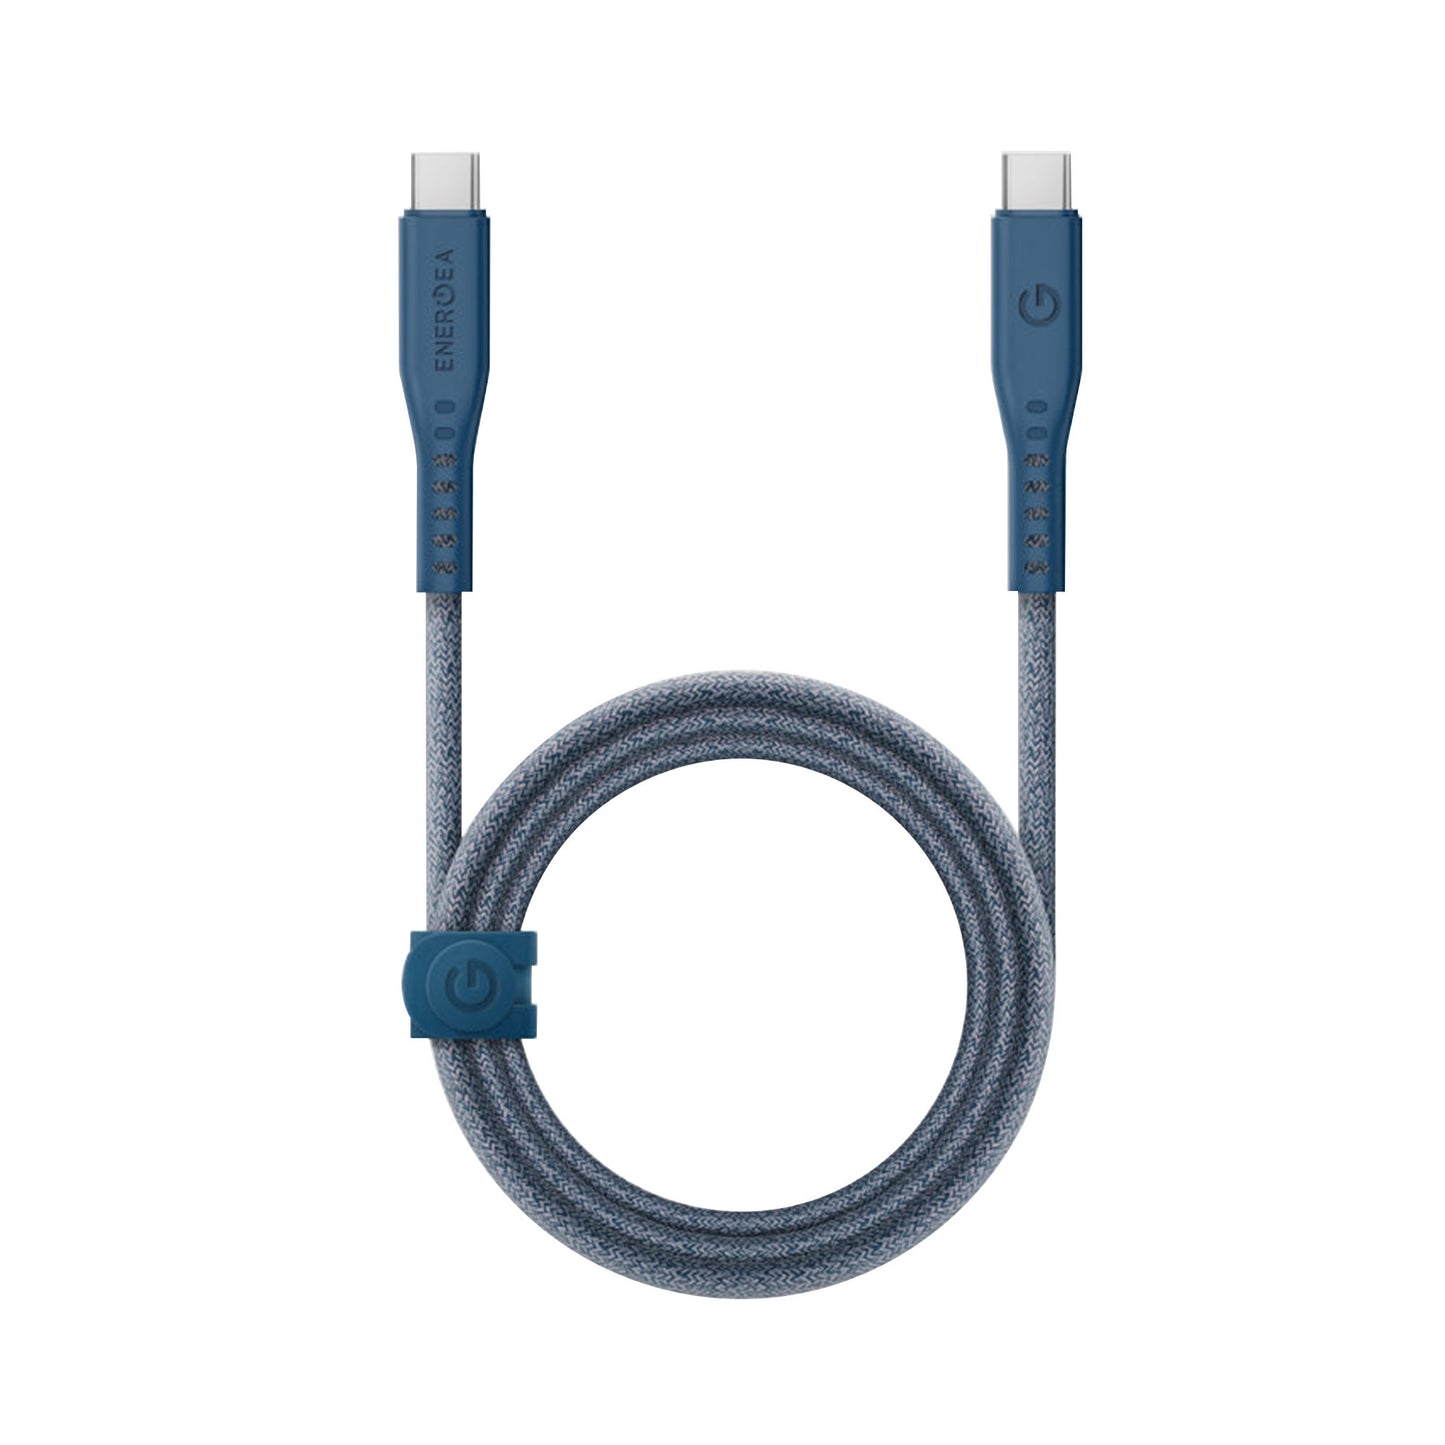 ENERGEA Flow 240w USB-C to USB-C PD Fast Charging Cable 1.5m - Blue